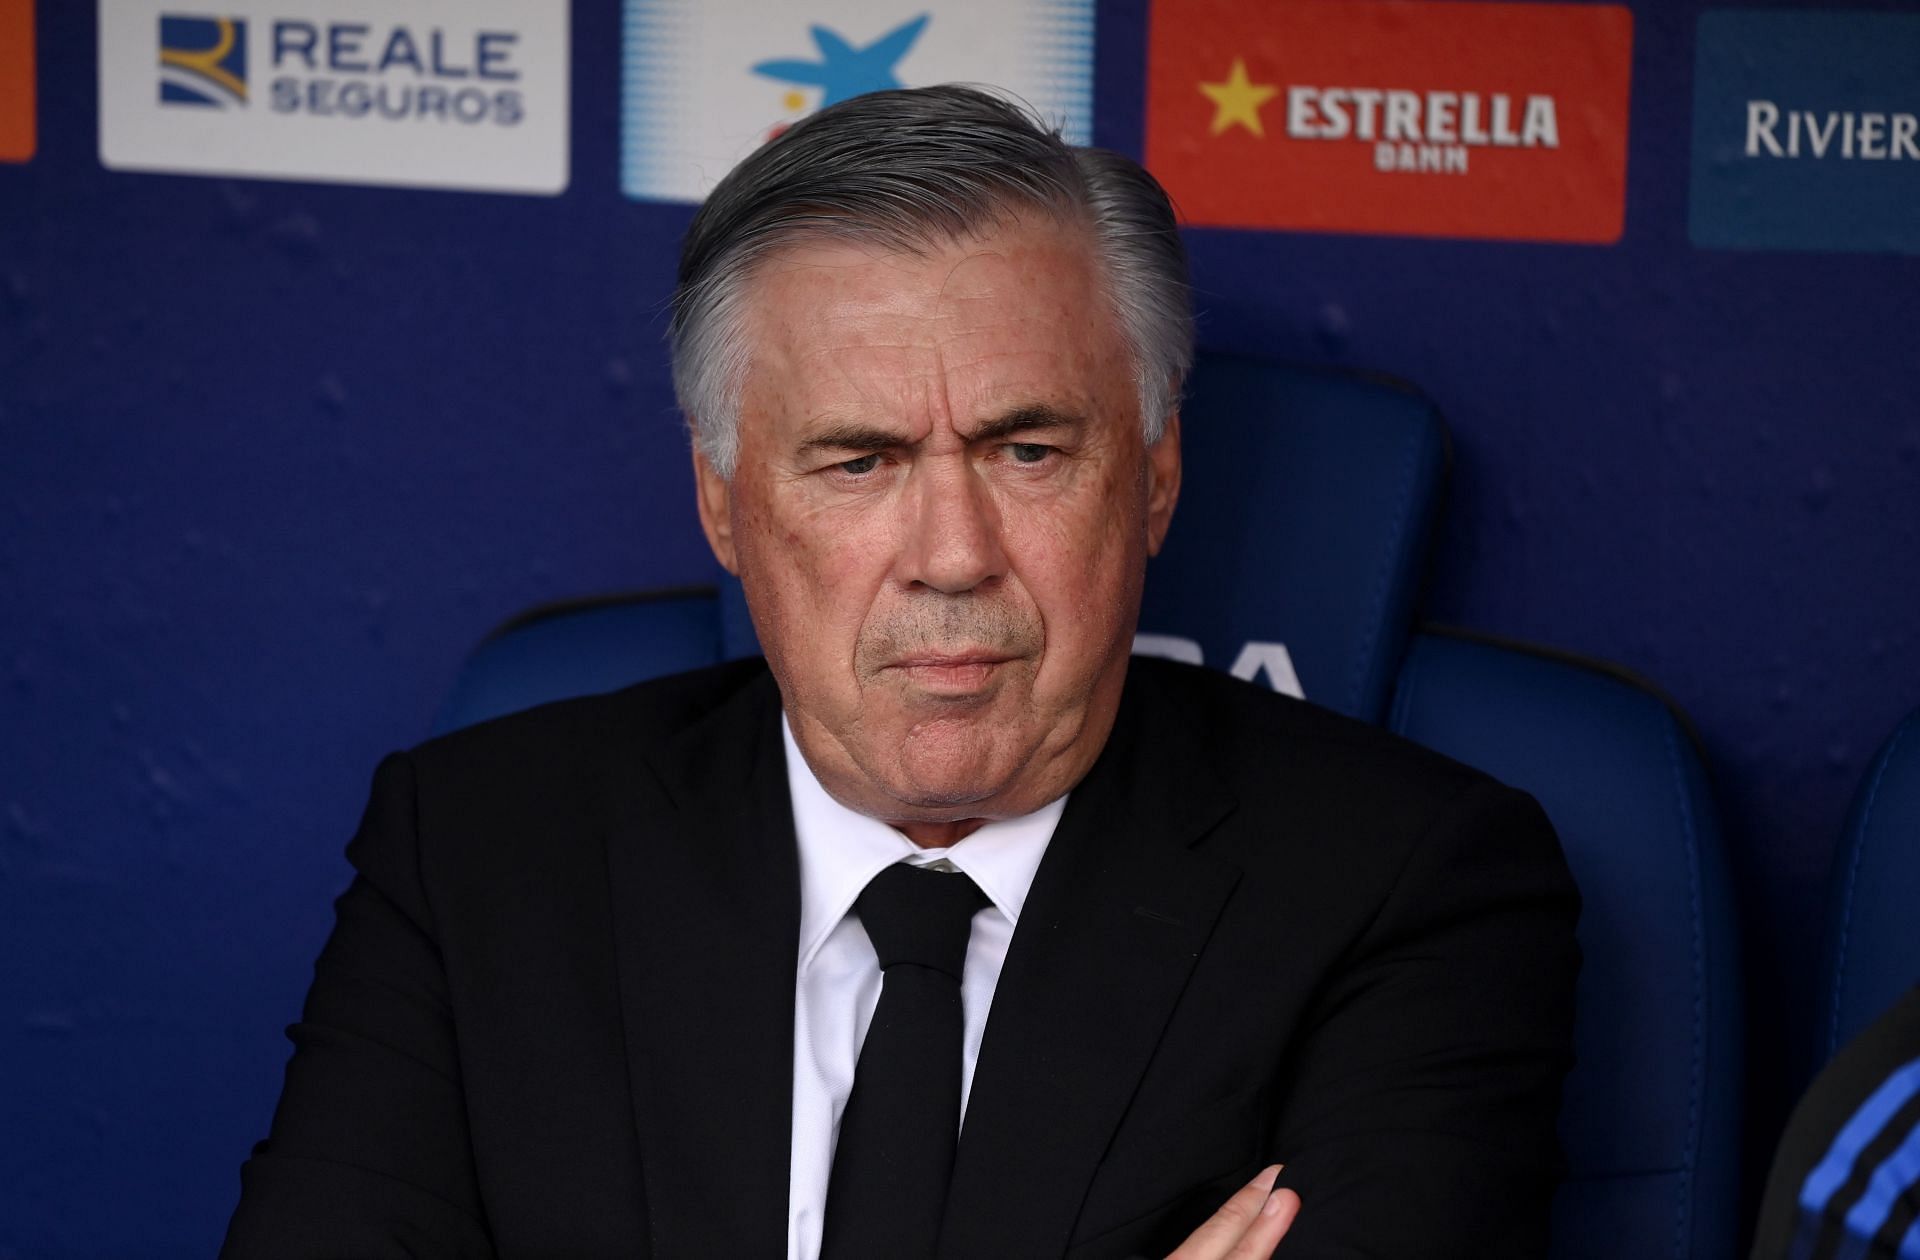 Can Carlo Ancelotti guide Real Madrid to another Champions League triumph this season?